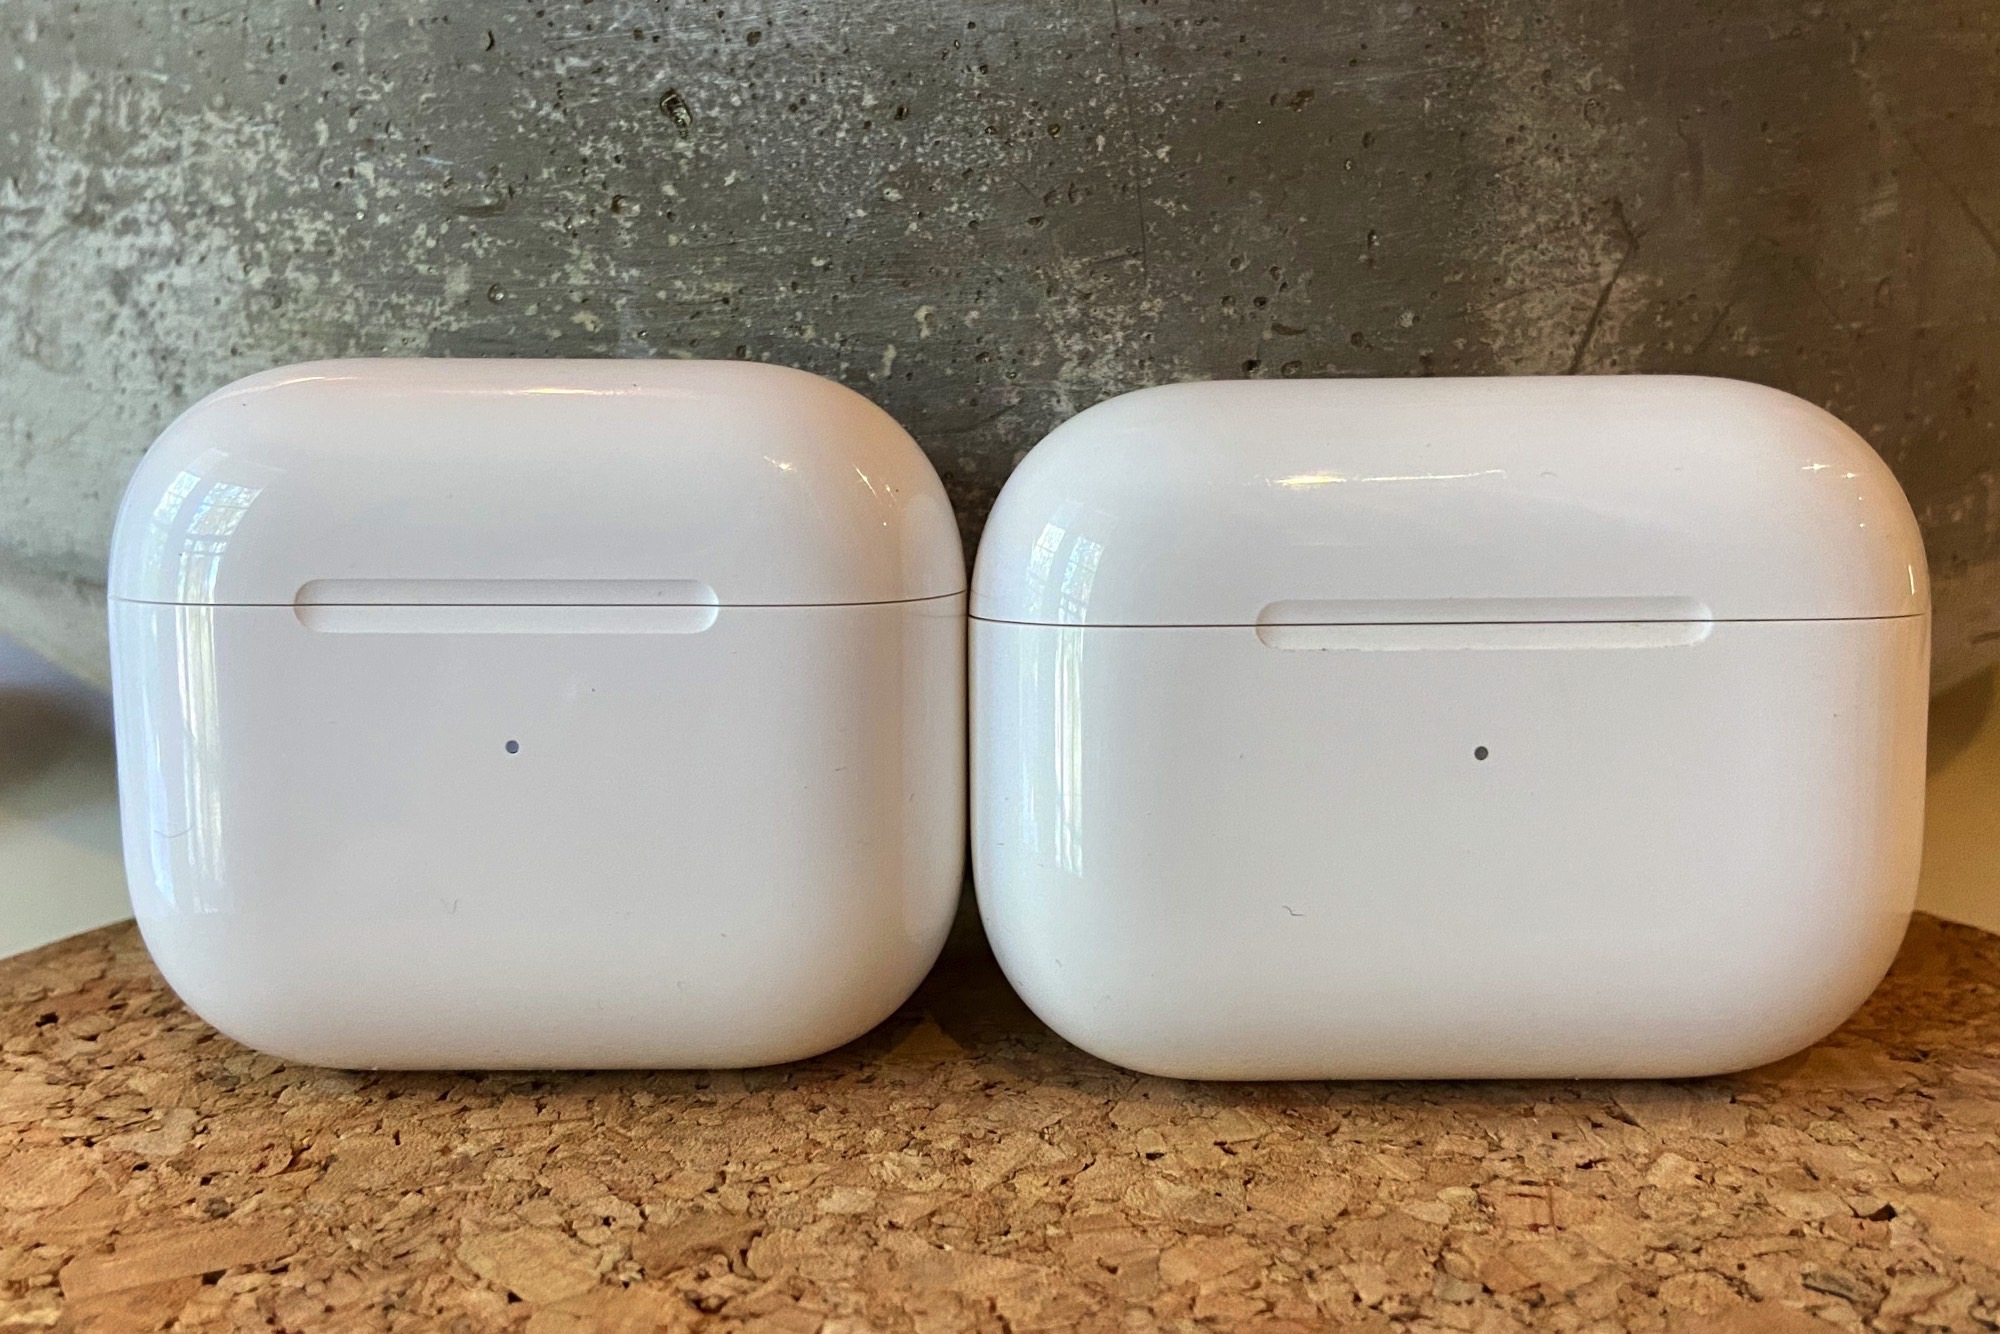 to check your AirPods level | Digital